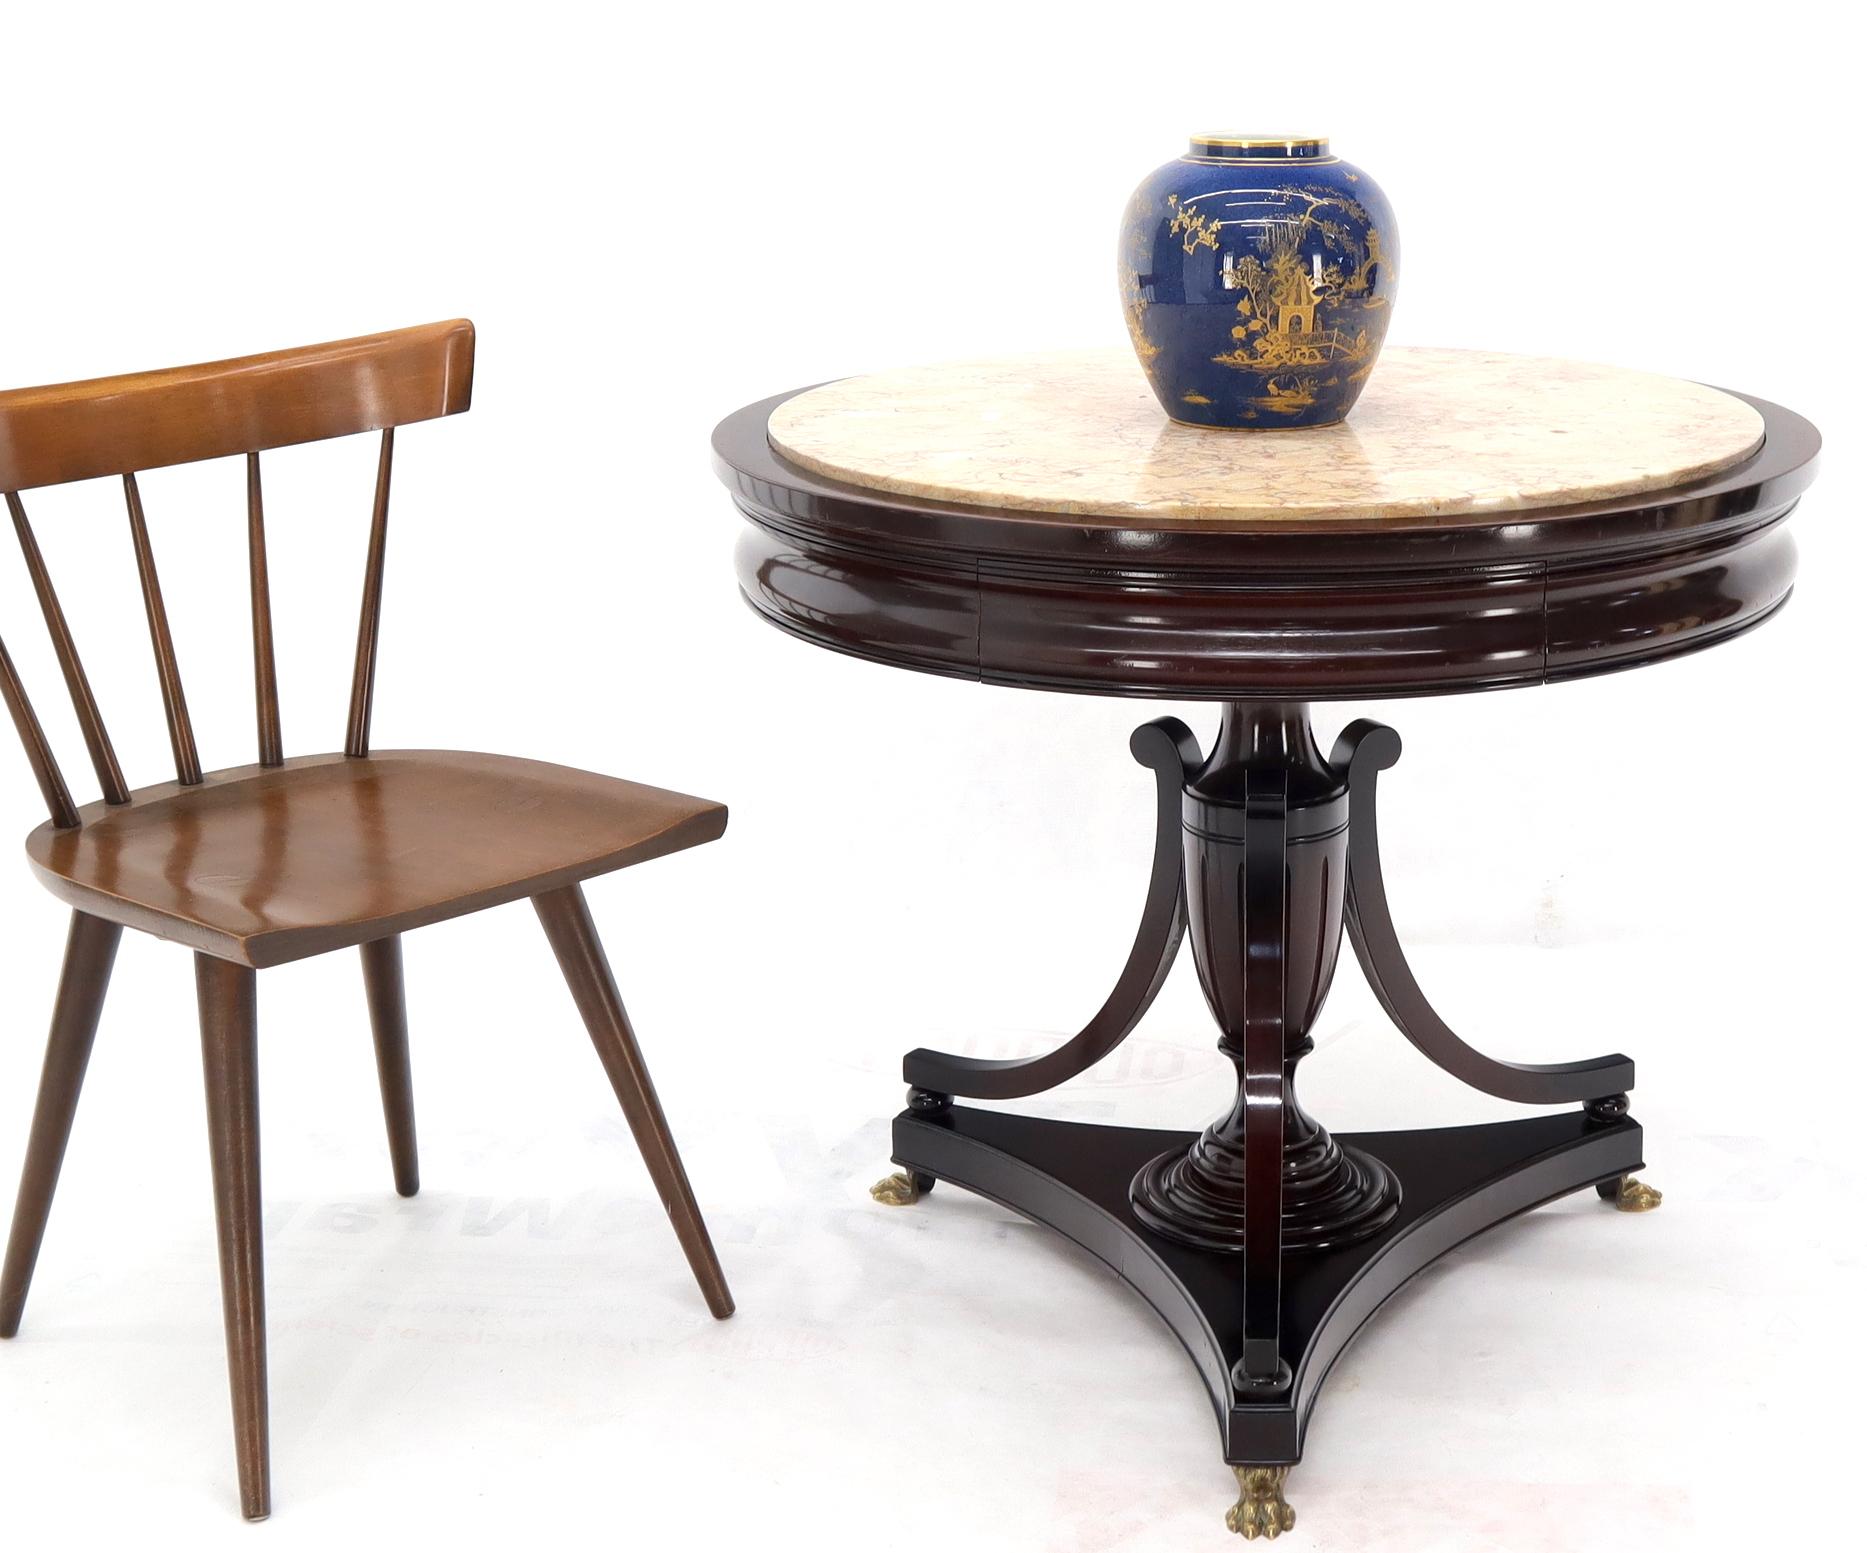 Very fine one drawer mahogany Regency gueridon center lamp table with brass feet.